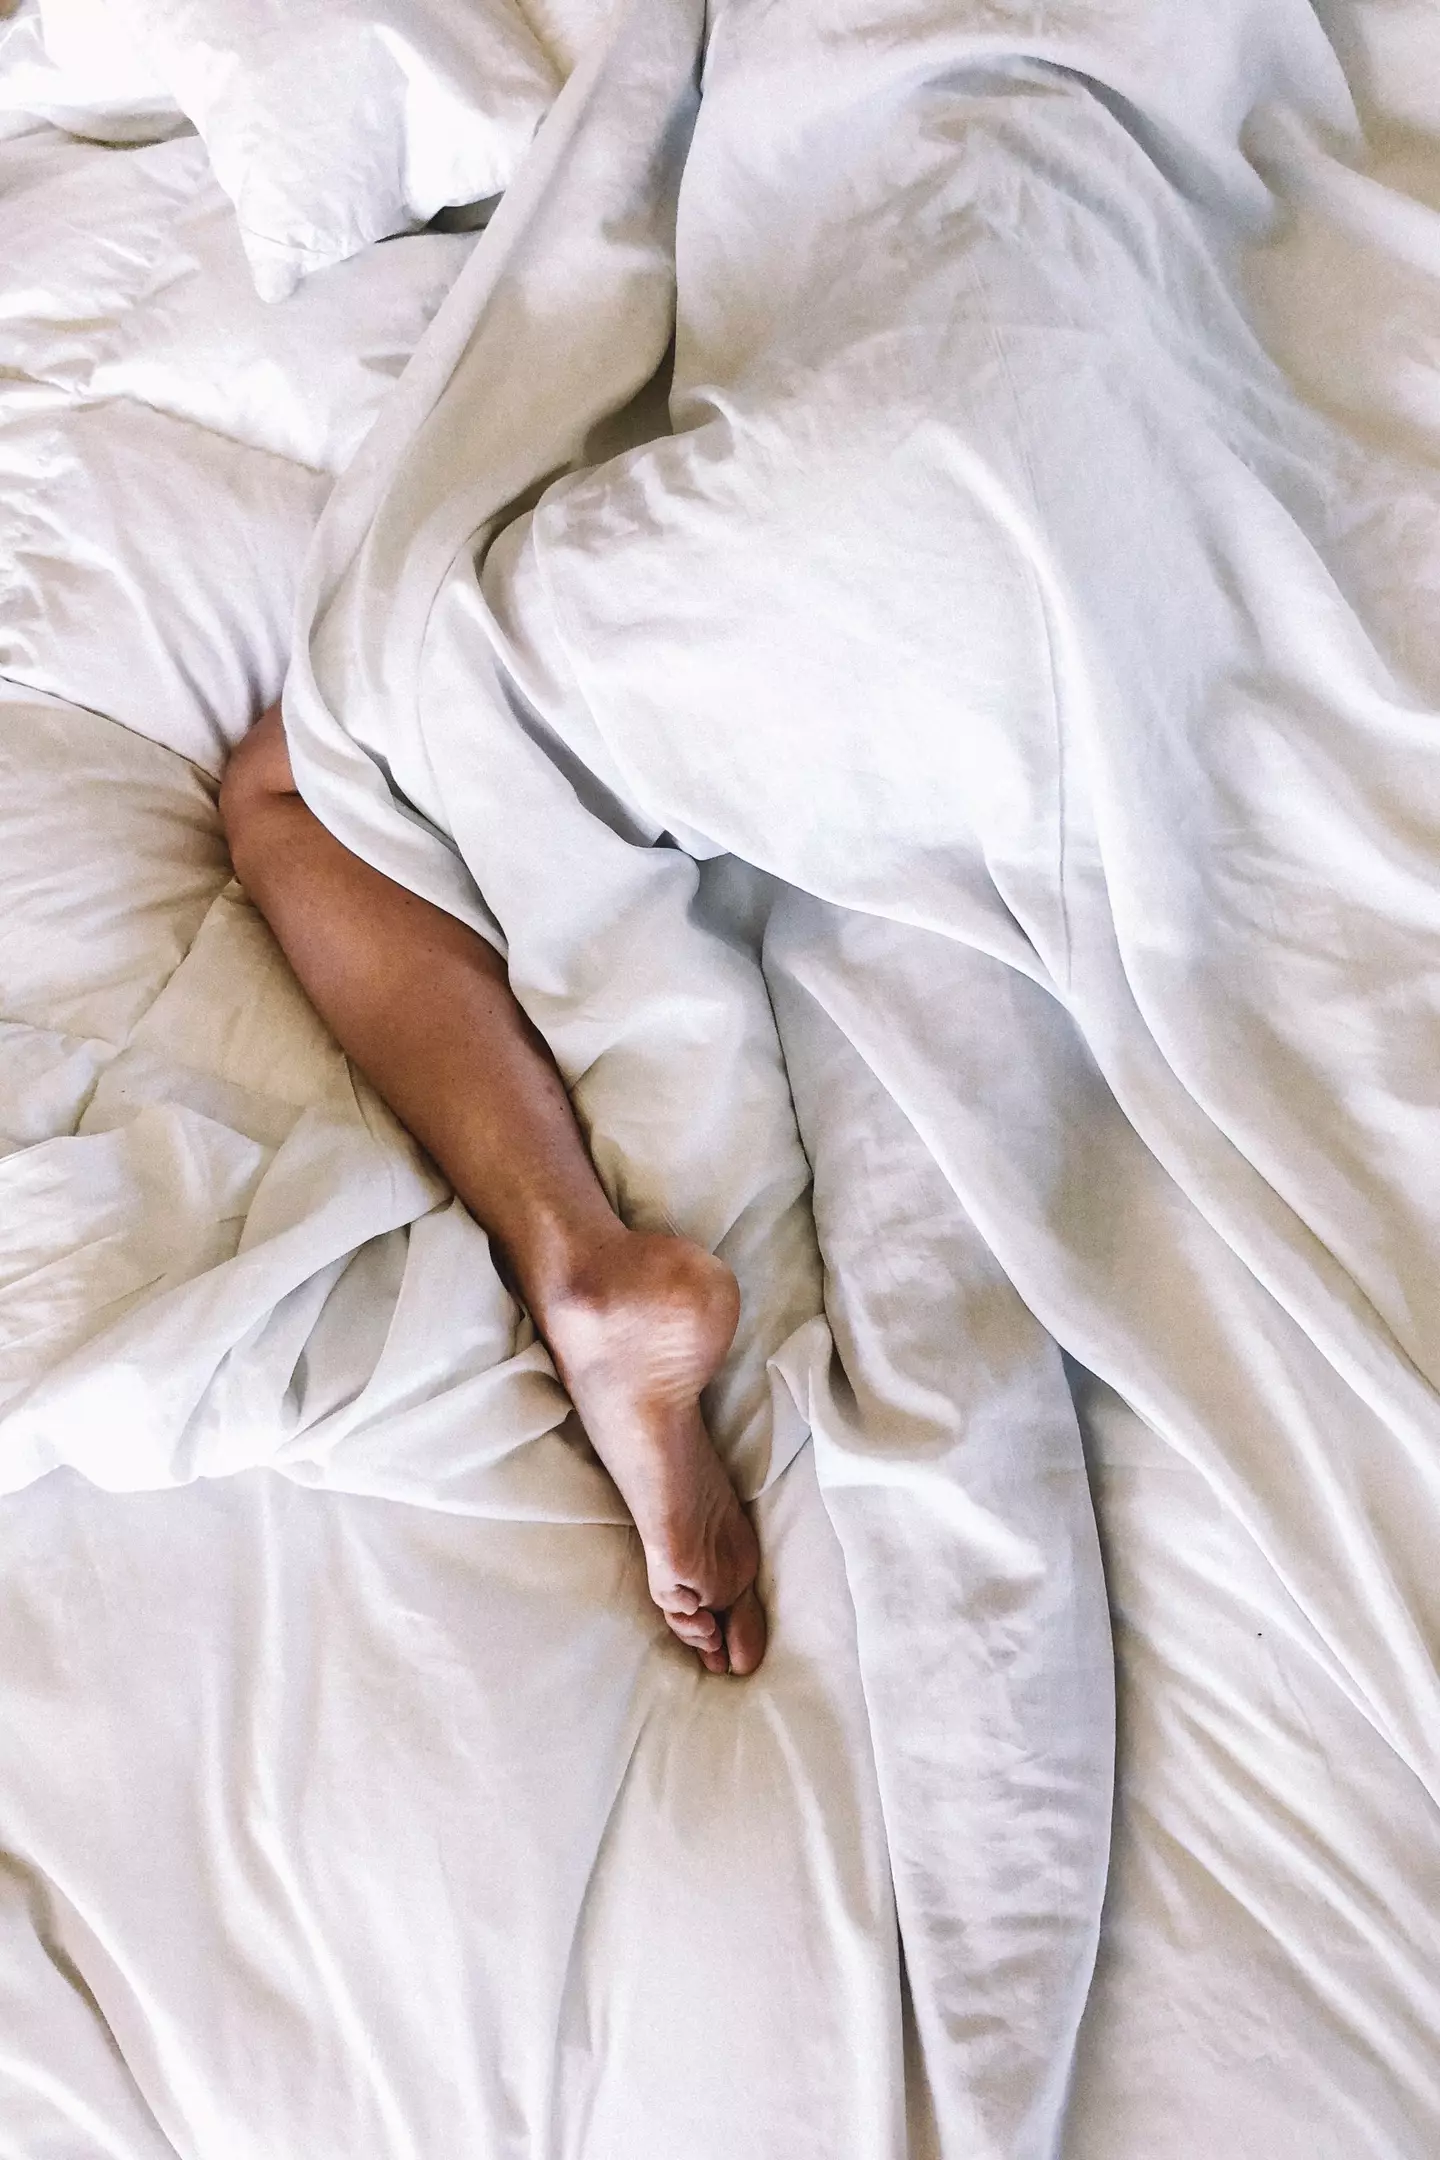 Duvet hogging was another annoying habit for many of the respondents (